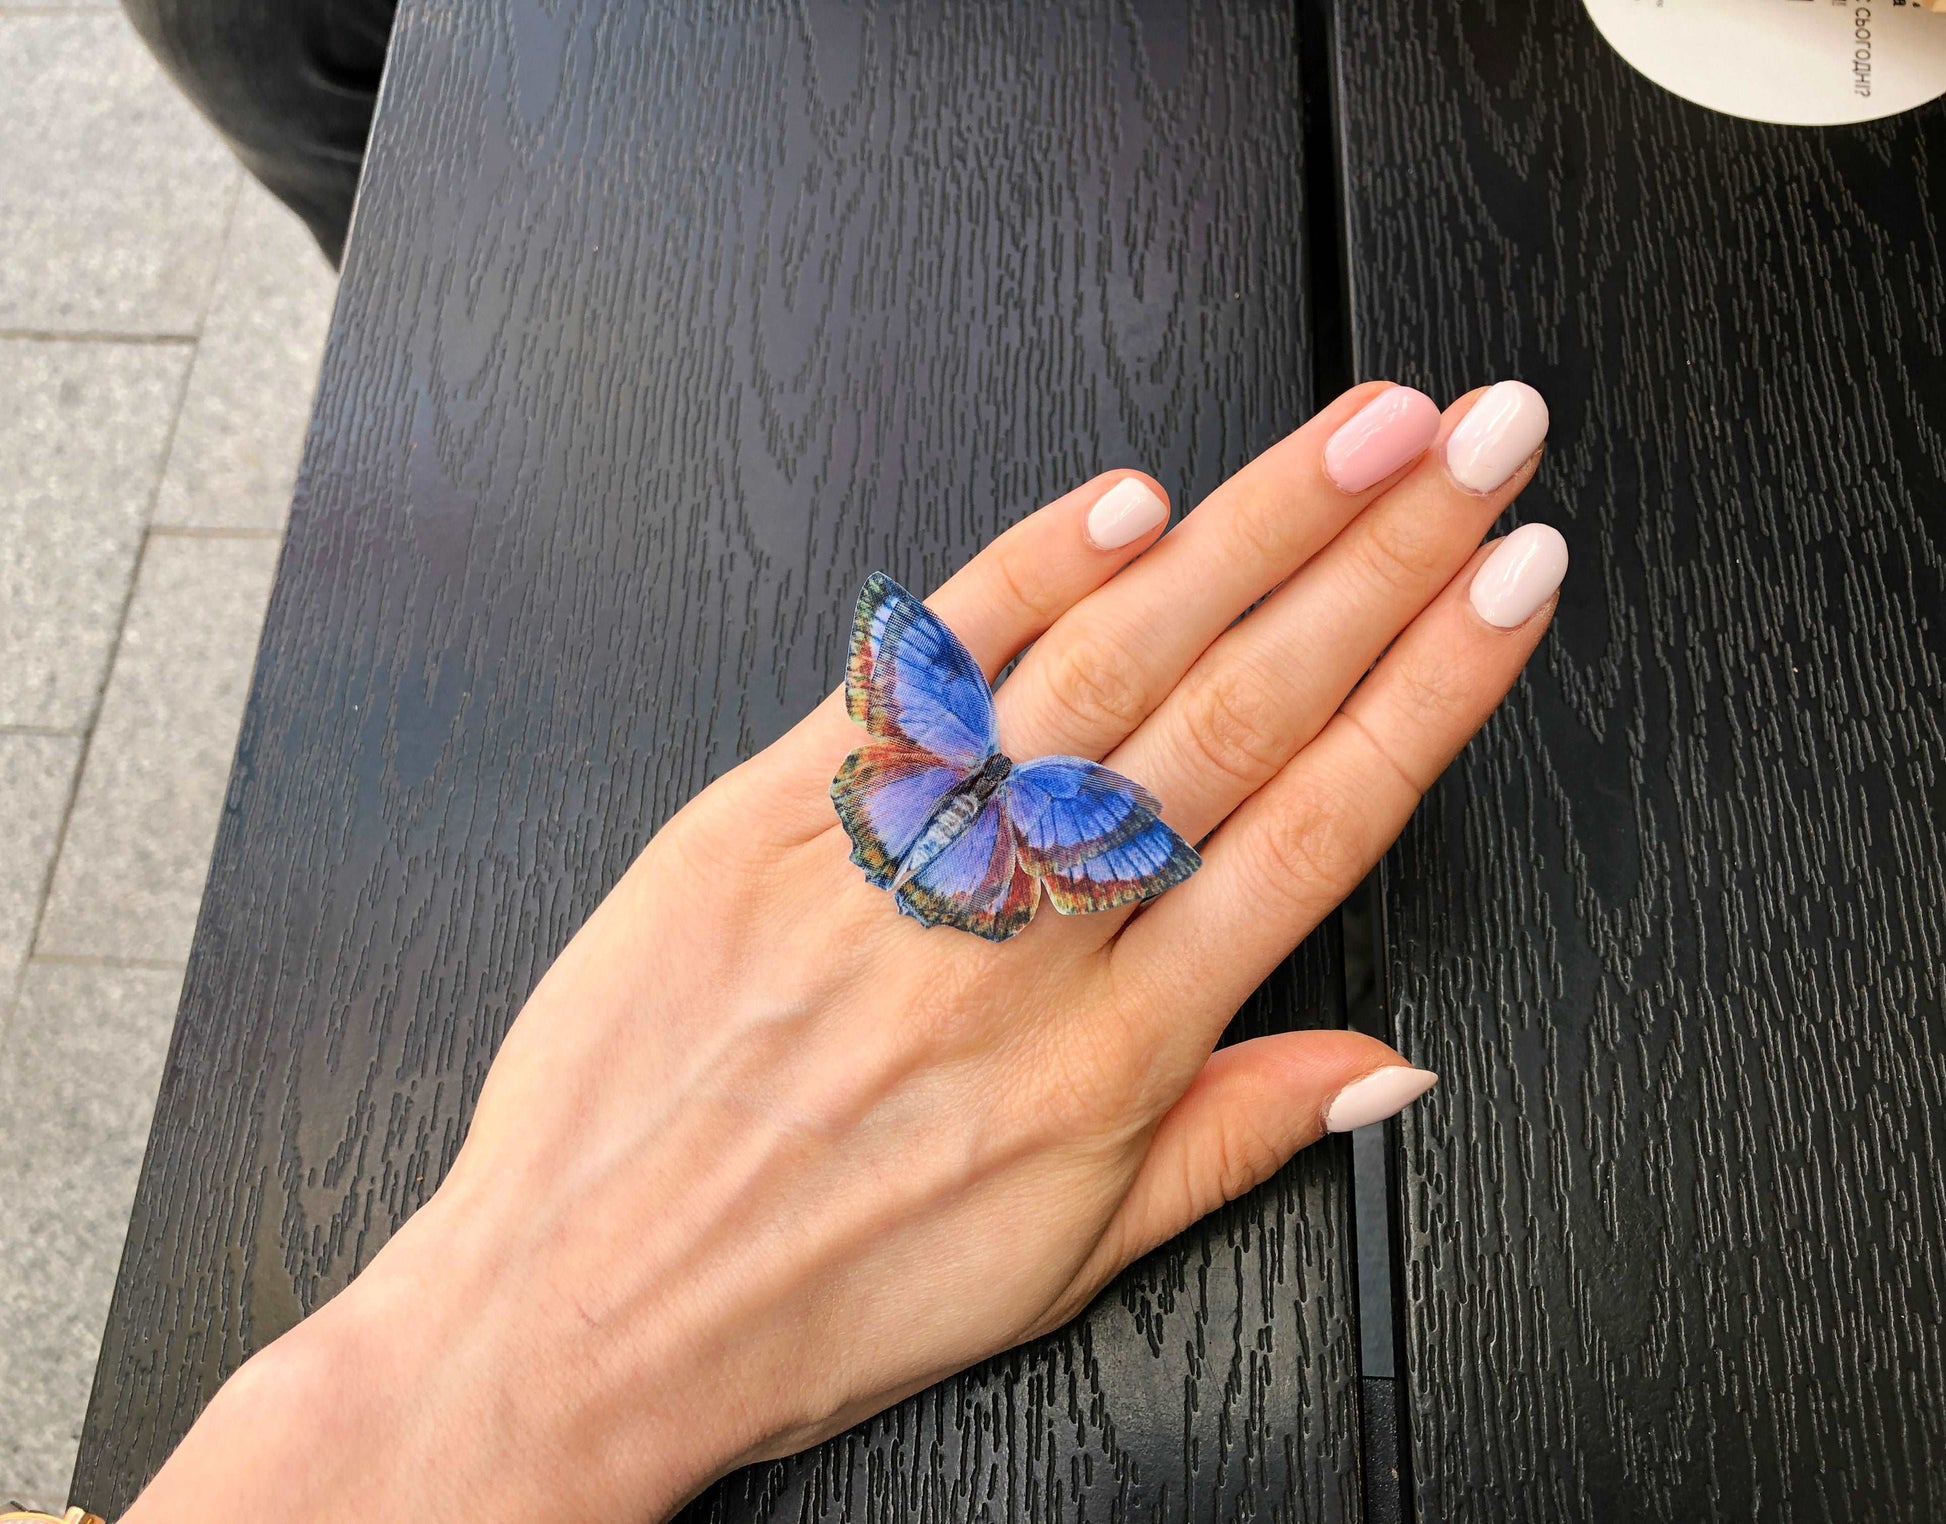 Indigo Blue Butterfly Ring - Handcrafted Insect Jewelry with Faux Silk Butterfly, Adjustable Ring for Nature-Inspired Style